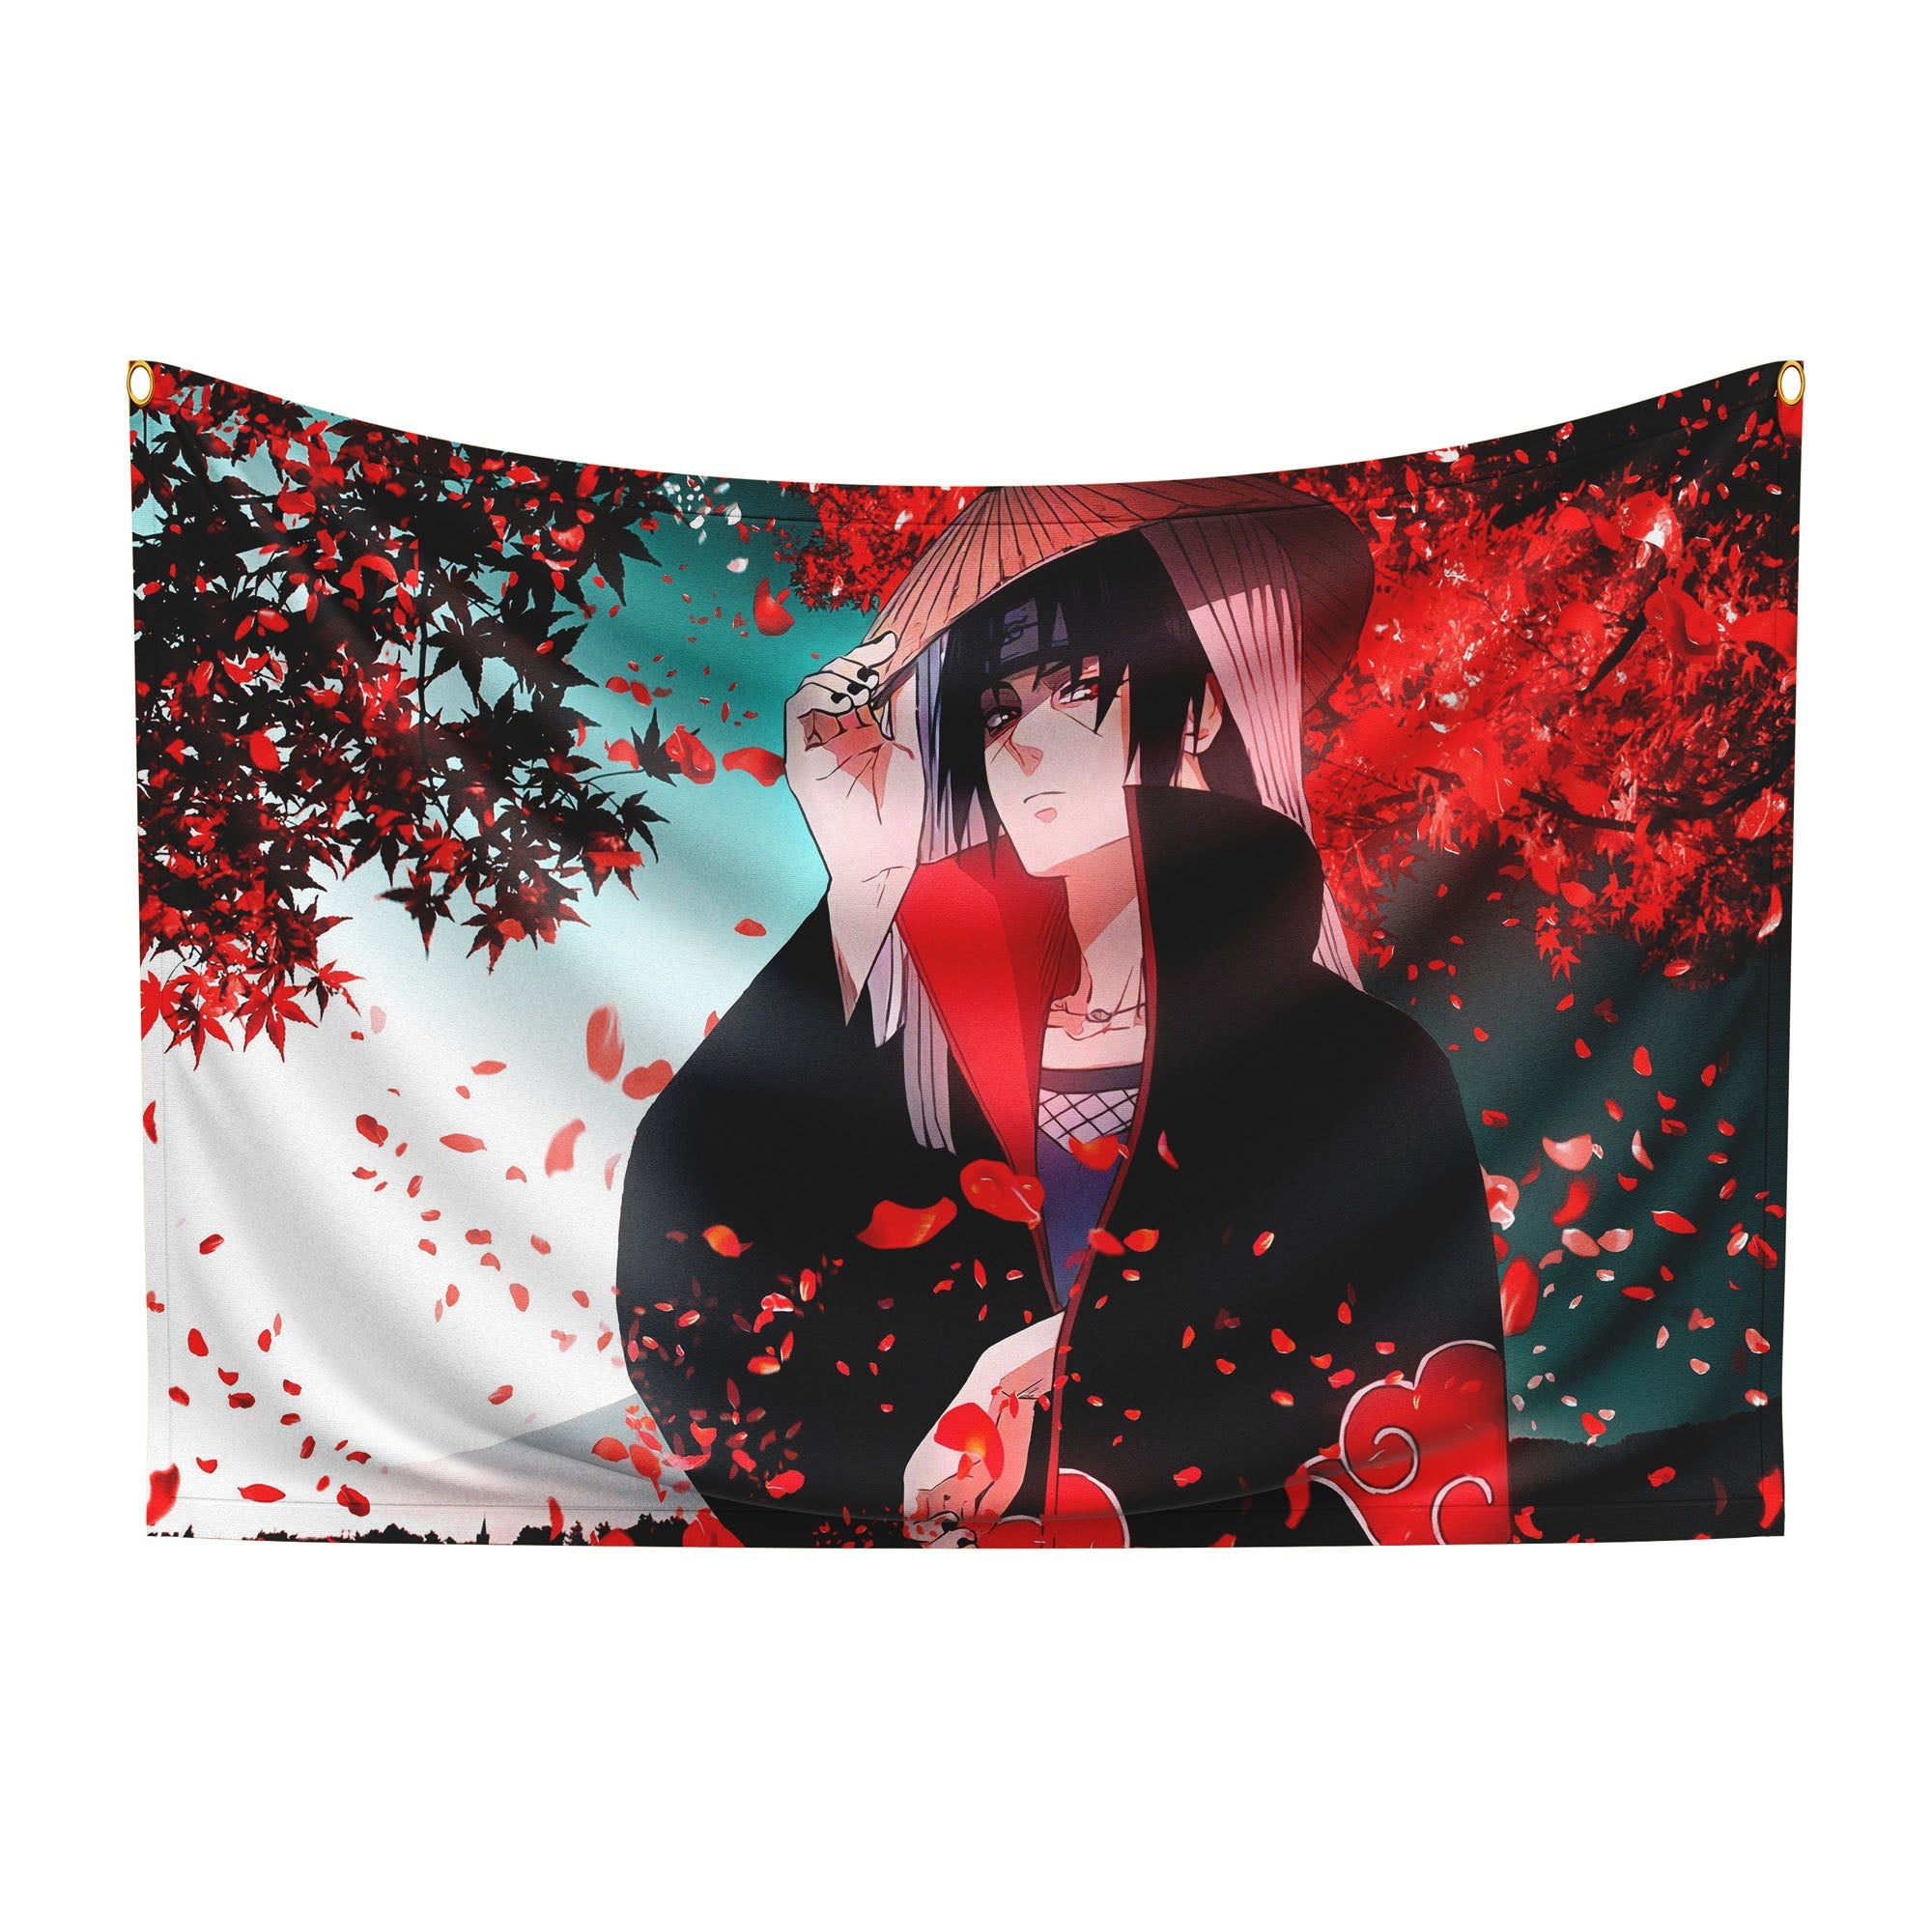 N Cool Flags Lewd - Sad Japanese Anime Aesthetic Flag 3x5 Feet Banner Funny  Poster Uv Resistance Fading & Durable Wall Flag for Dorm Room Decor Parties  Gift Tailgates : Amazon.sg: Garden